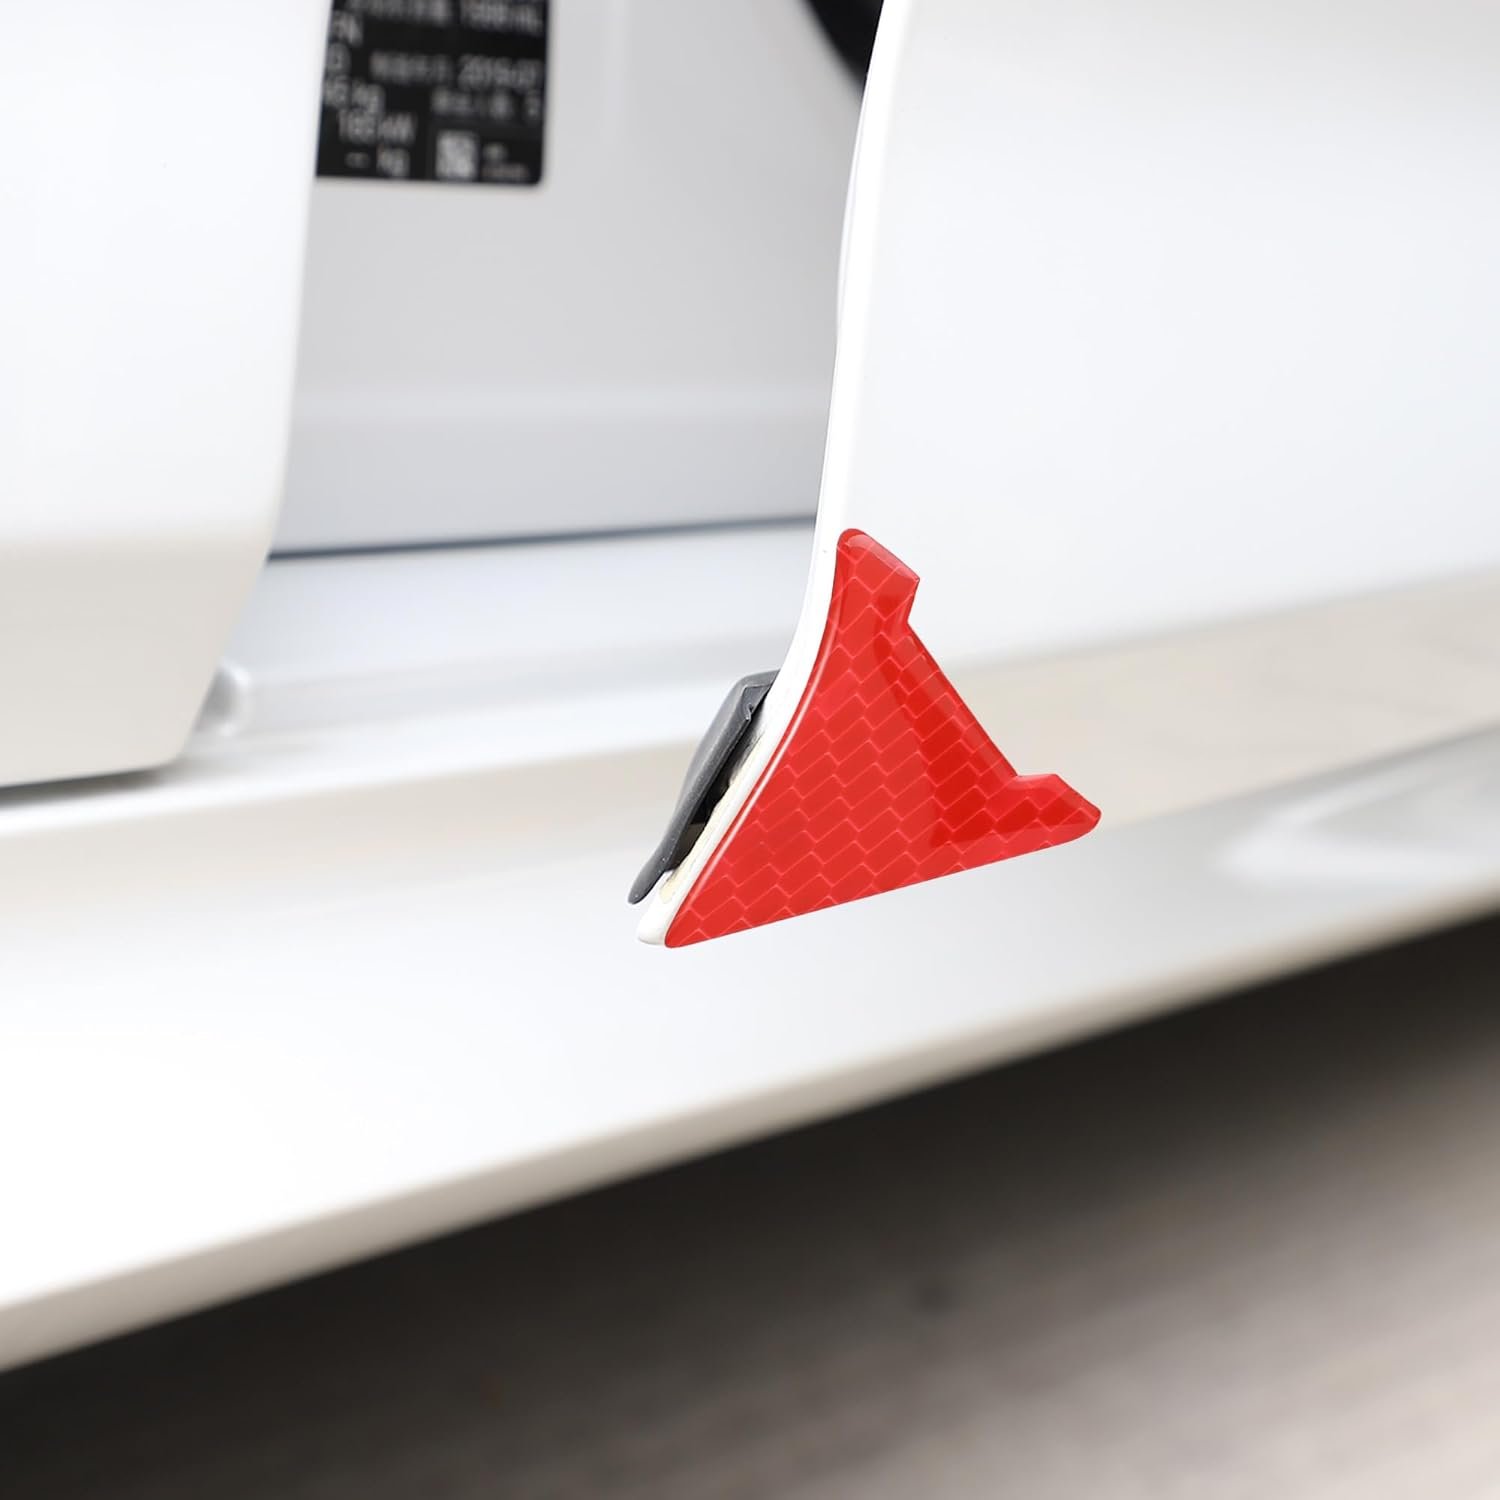 TOMALL Reflective Car Door Edge Guards Review